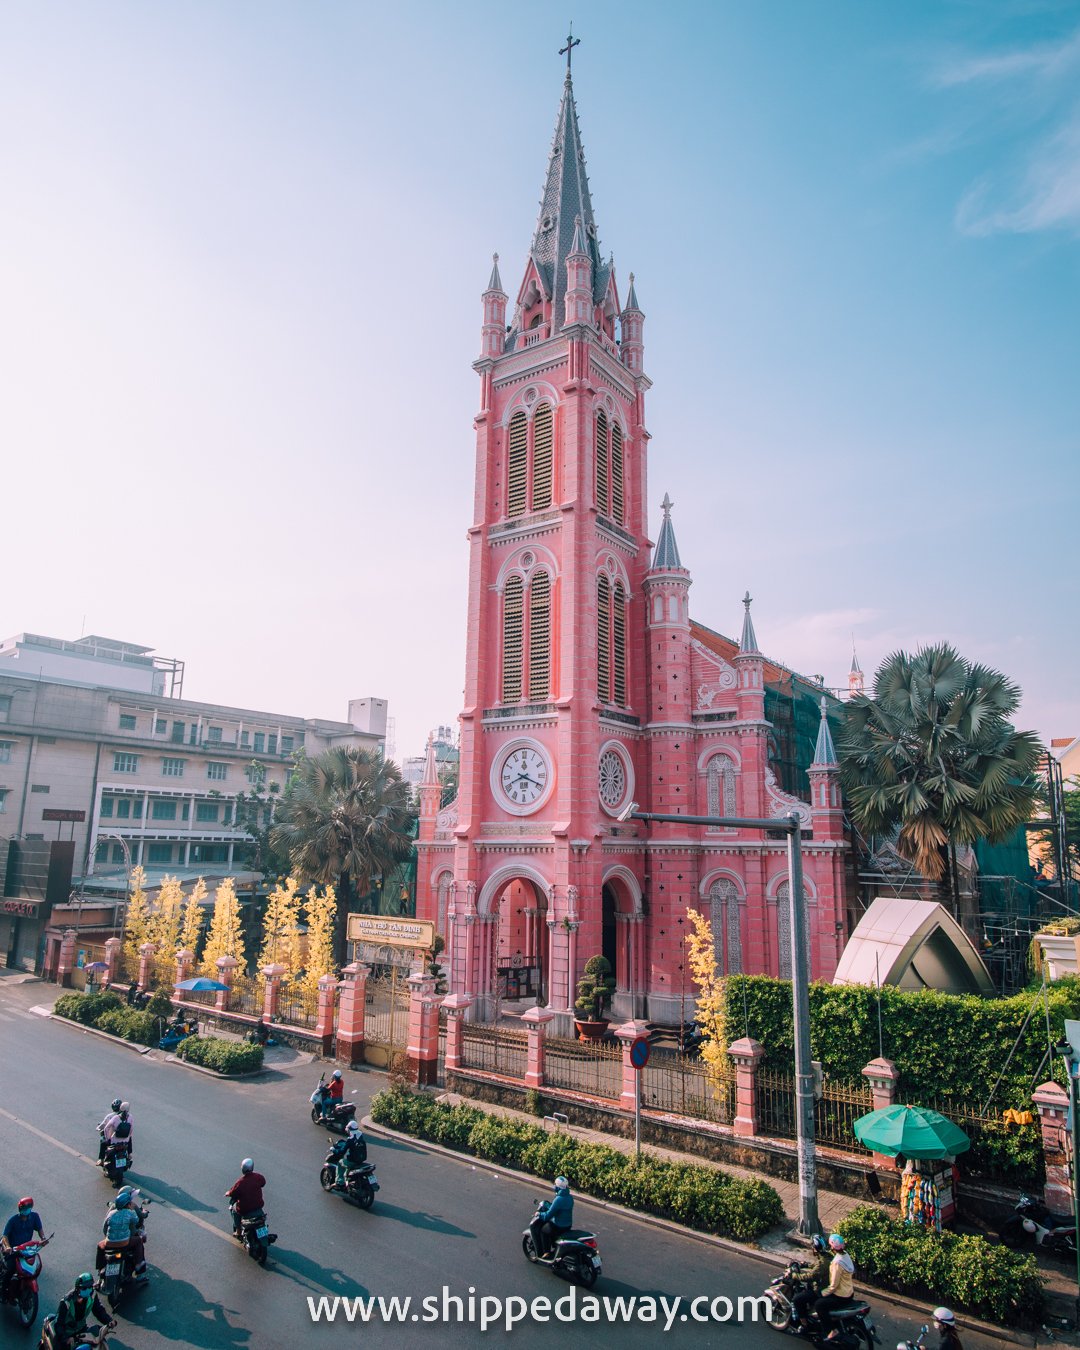 View of the street and the Pink Church, Ho Chi Minh City, Vietnam